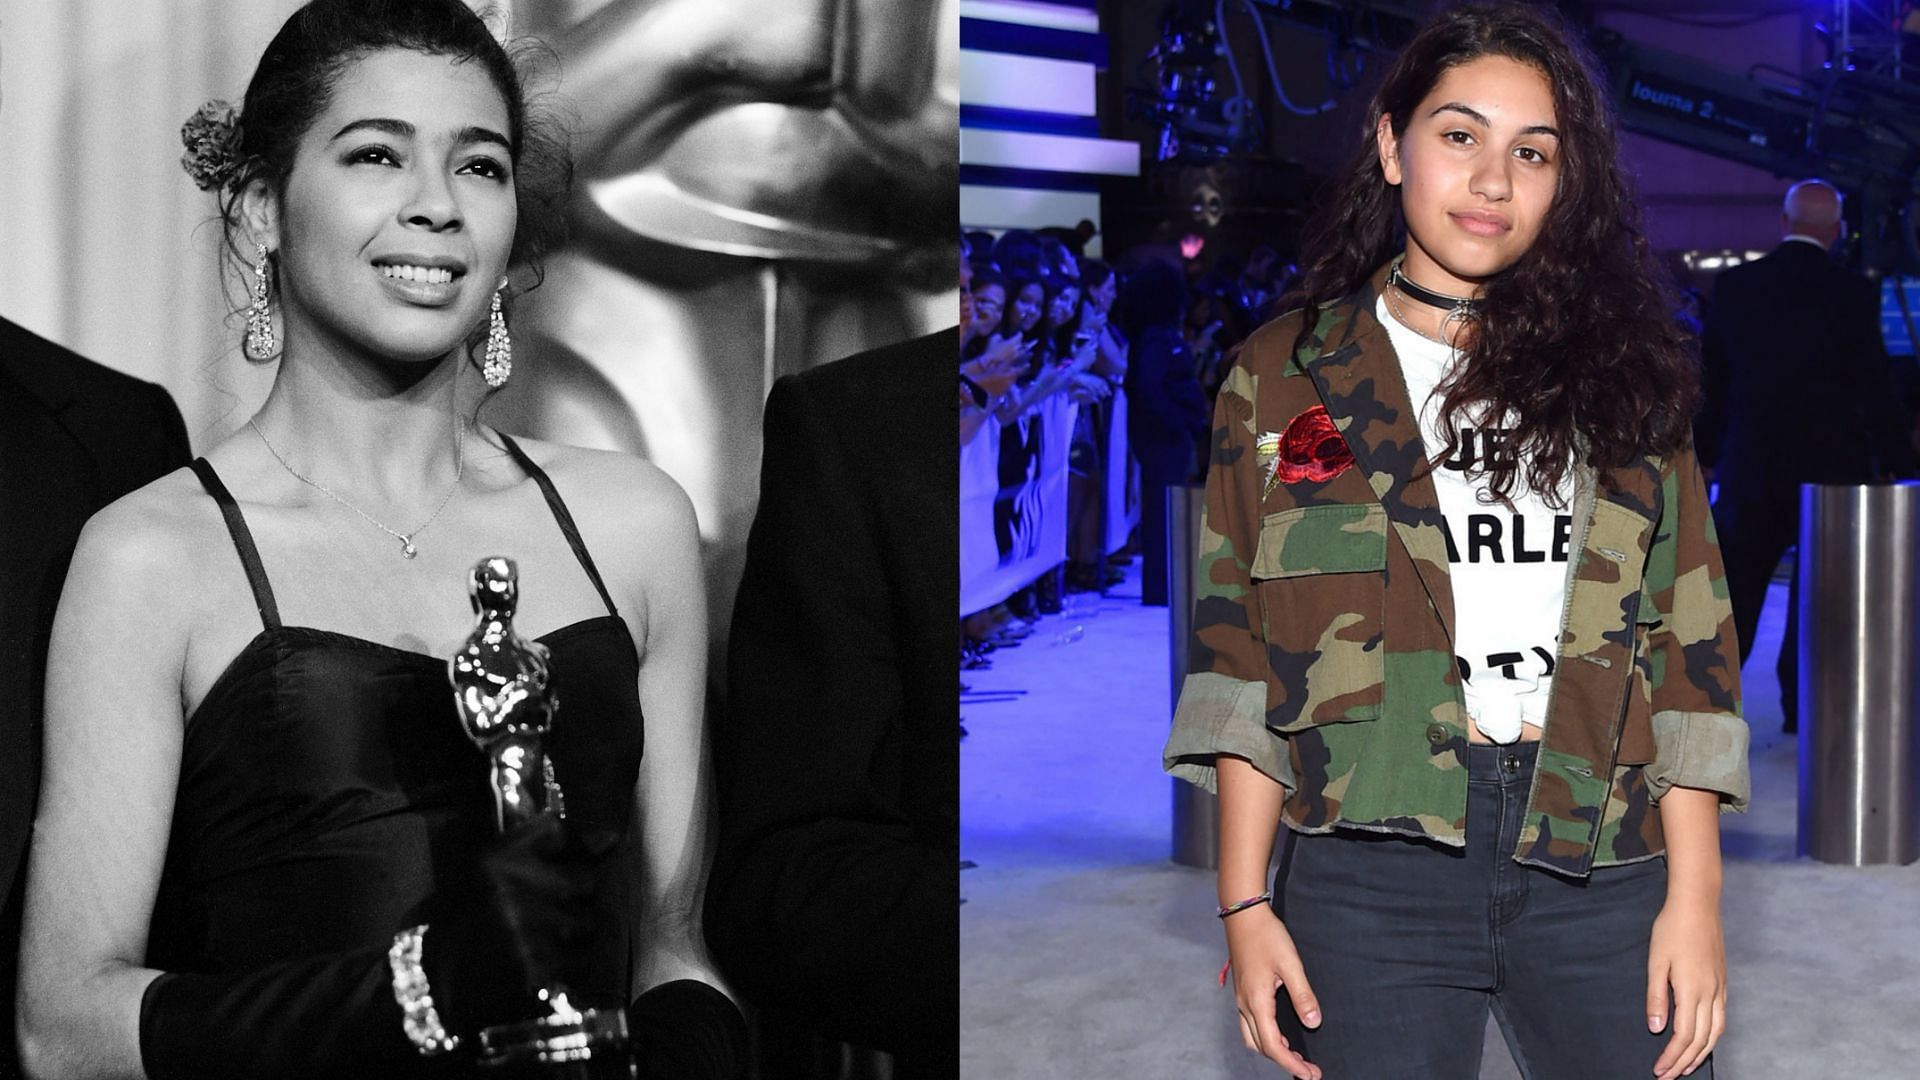 Alessia Cara is not related to late-singer Irene Cara (Images via Getty Images)